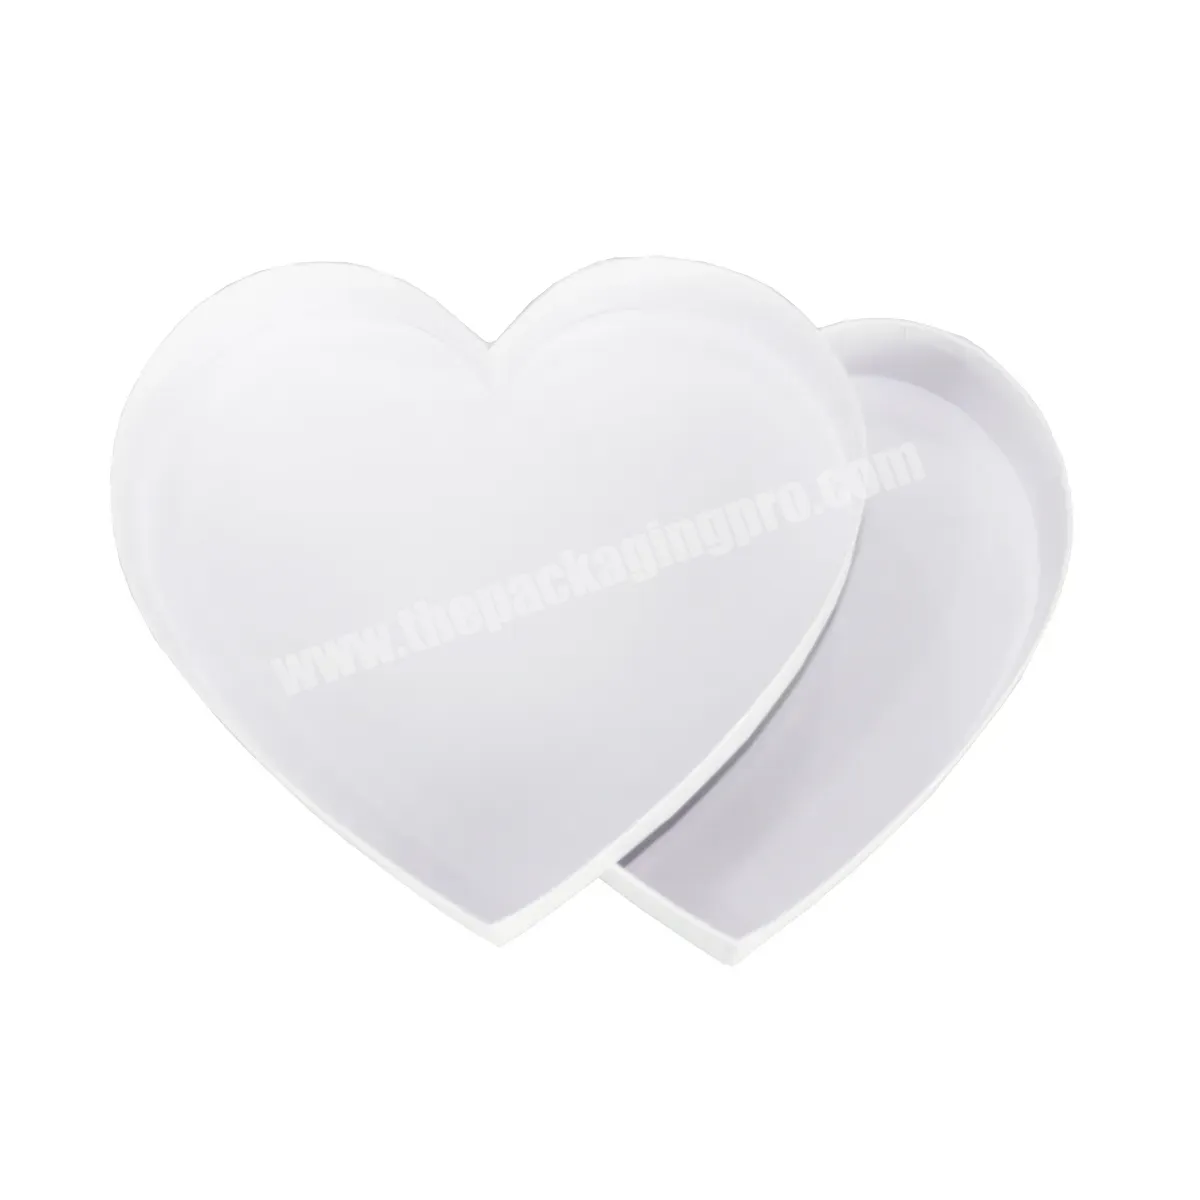 Unique And Stylish Heart-shaped Paper Boxes For Gifts And Packaging Customizable Designs Available - Buy Customizable Designs Available,Heart-shaped Paper Boxes,Unique And Stylish.